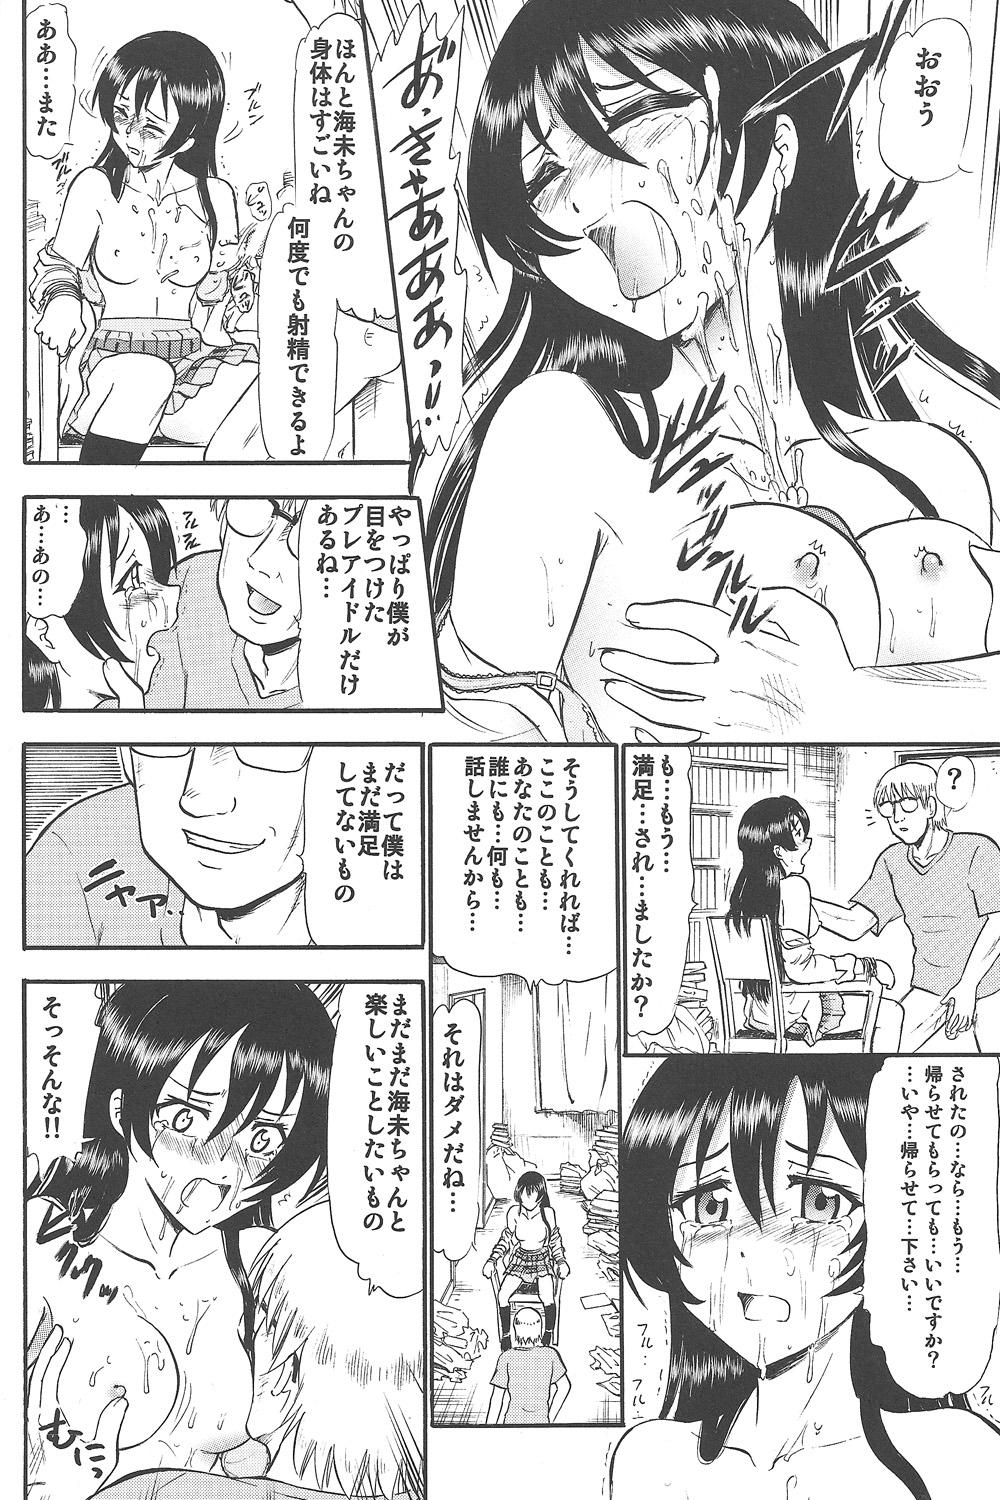 Camgirl Umi-chan Hitorijime - Love live Doctor Sex - Page 11